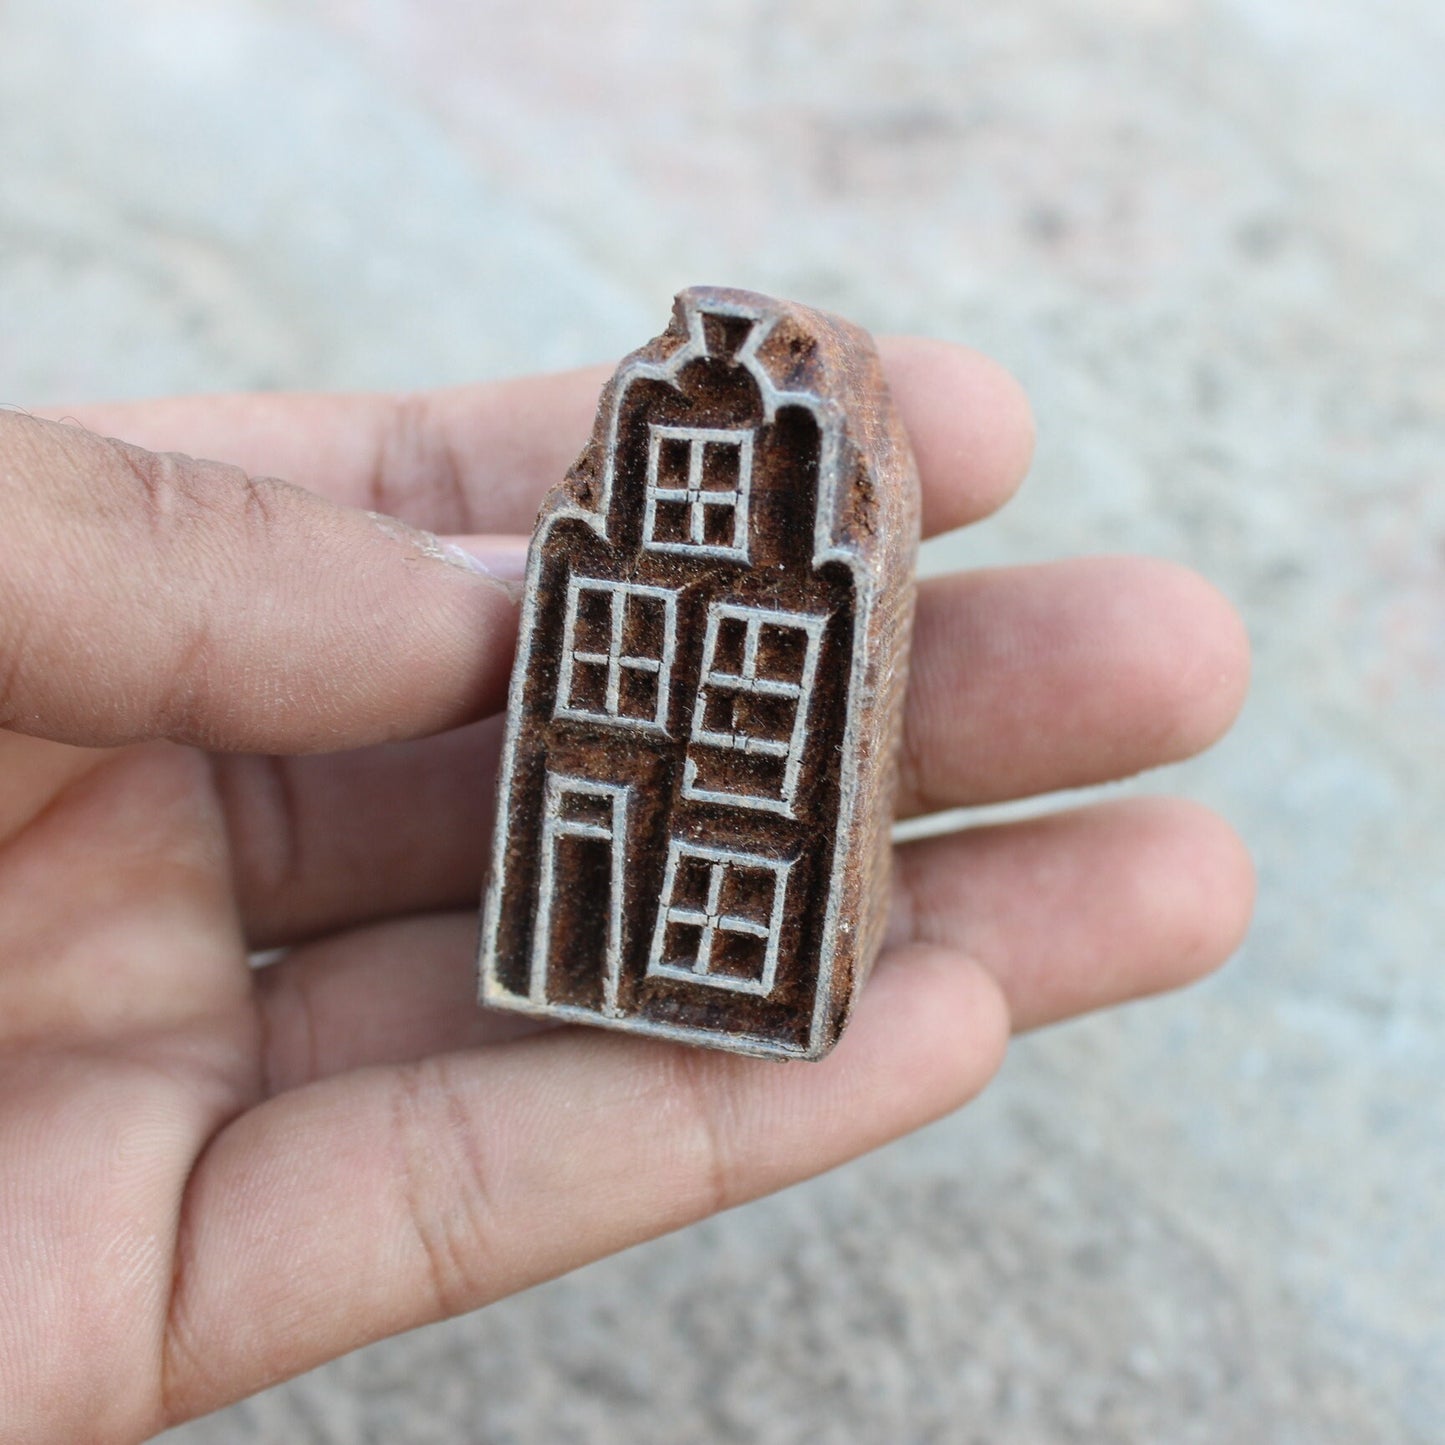 Home Block Print Stamp Hand Carved Wooden Stamp Building Block Print Stamp House Block Print Stamp For Printing House Soap Making Stamp